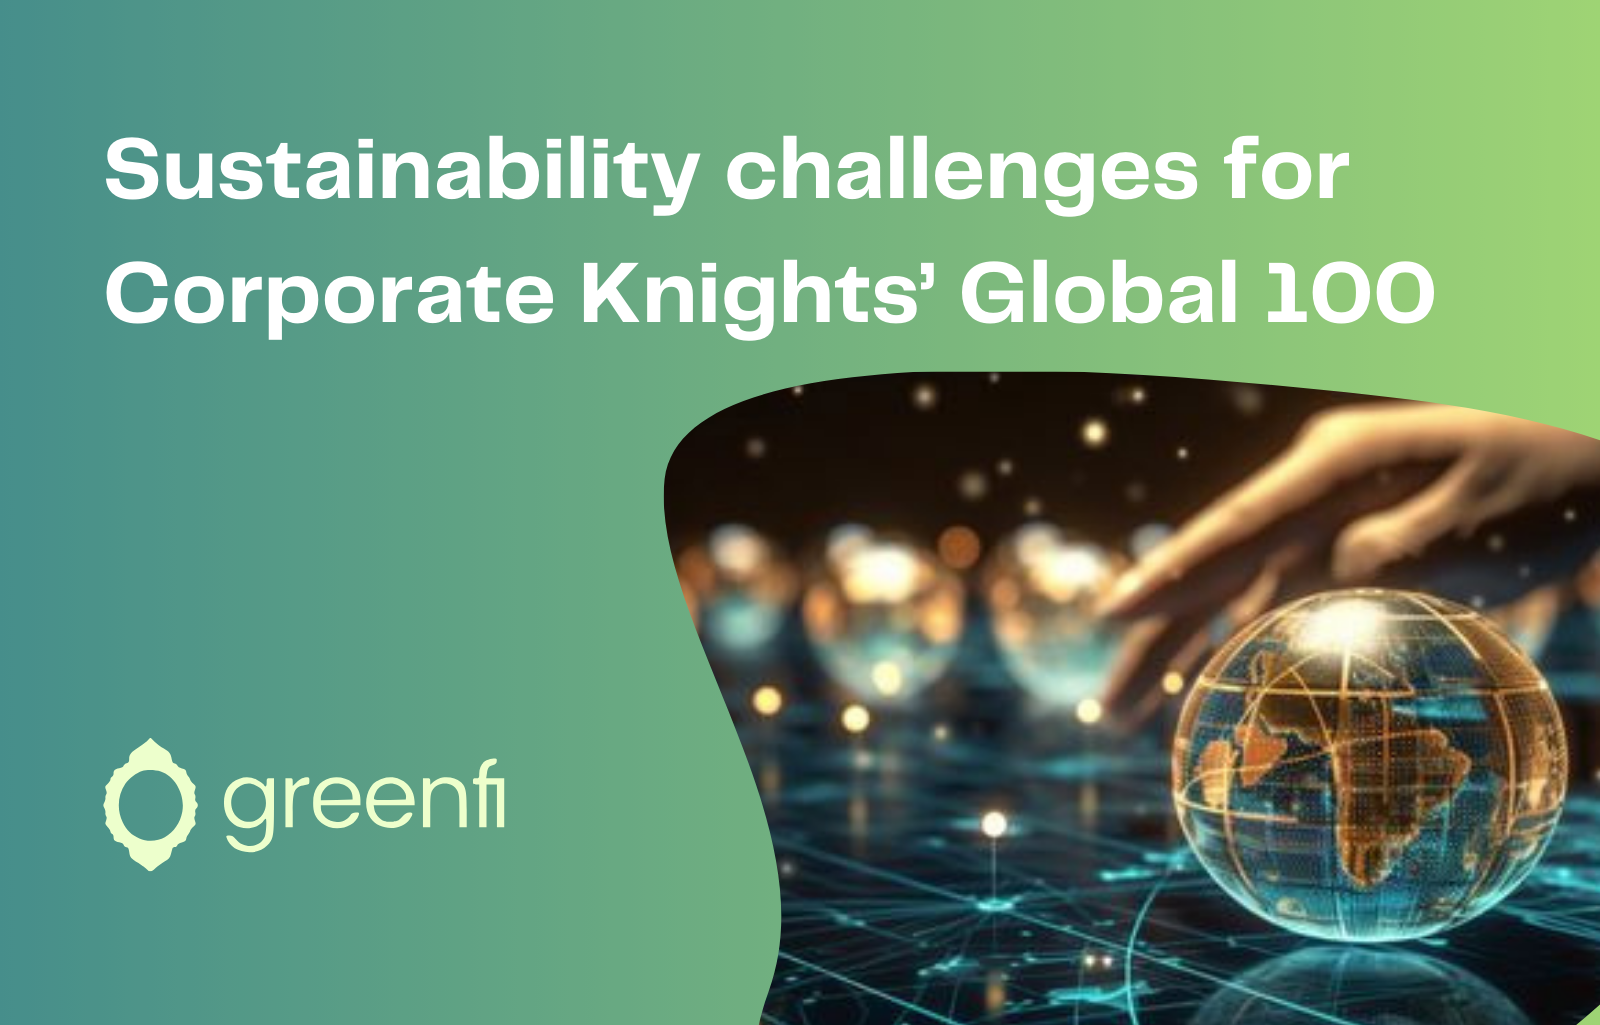 Corporate Knights' Global 100 ranking & next steps for companies committed to sustainability excellence